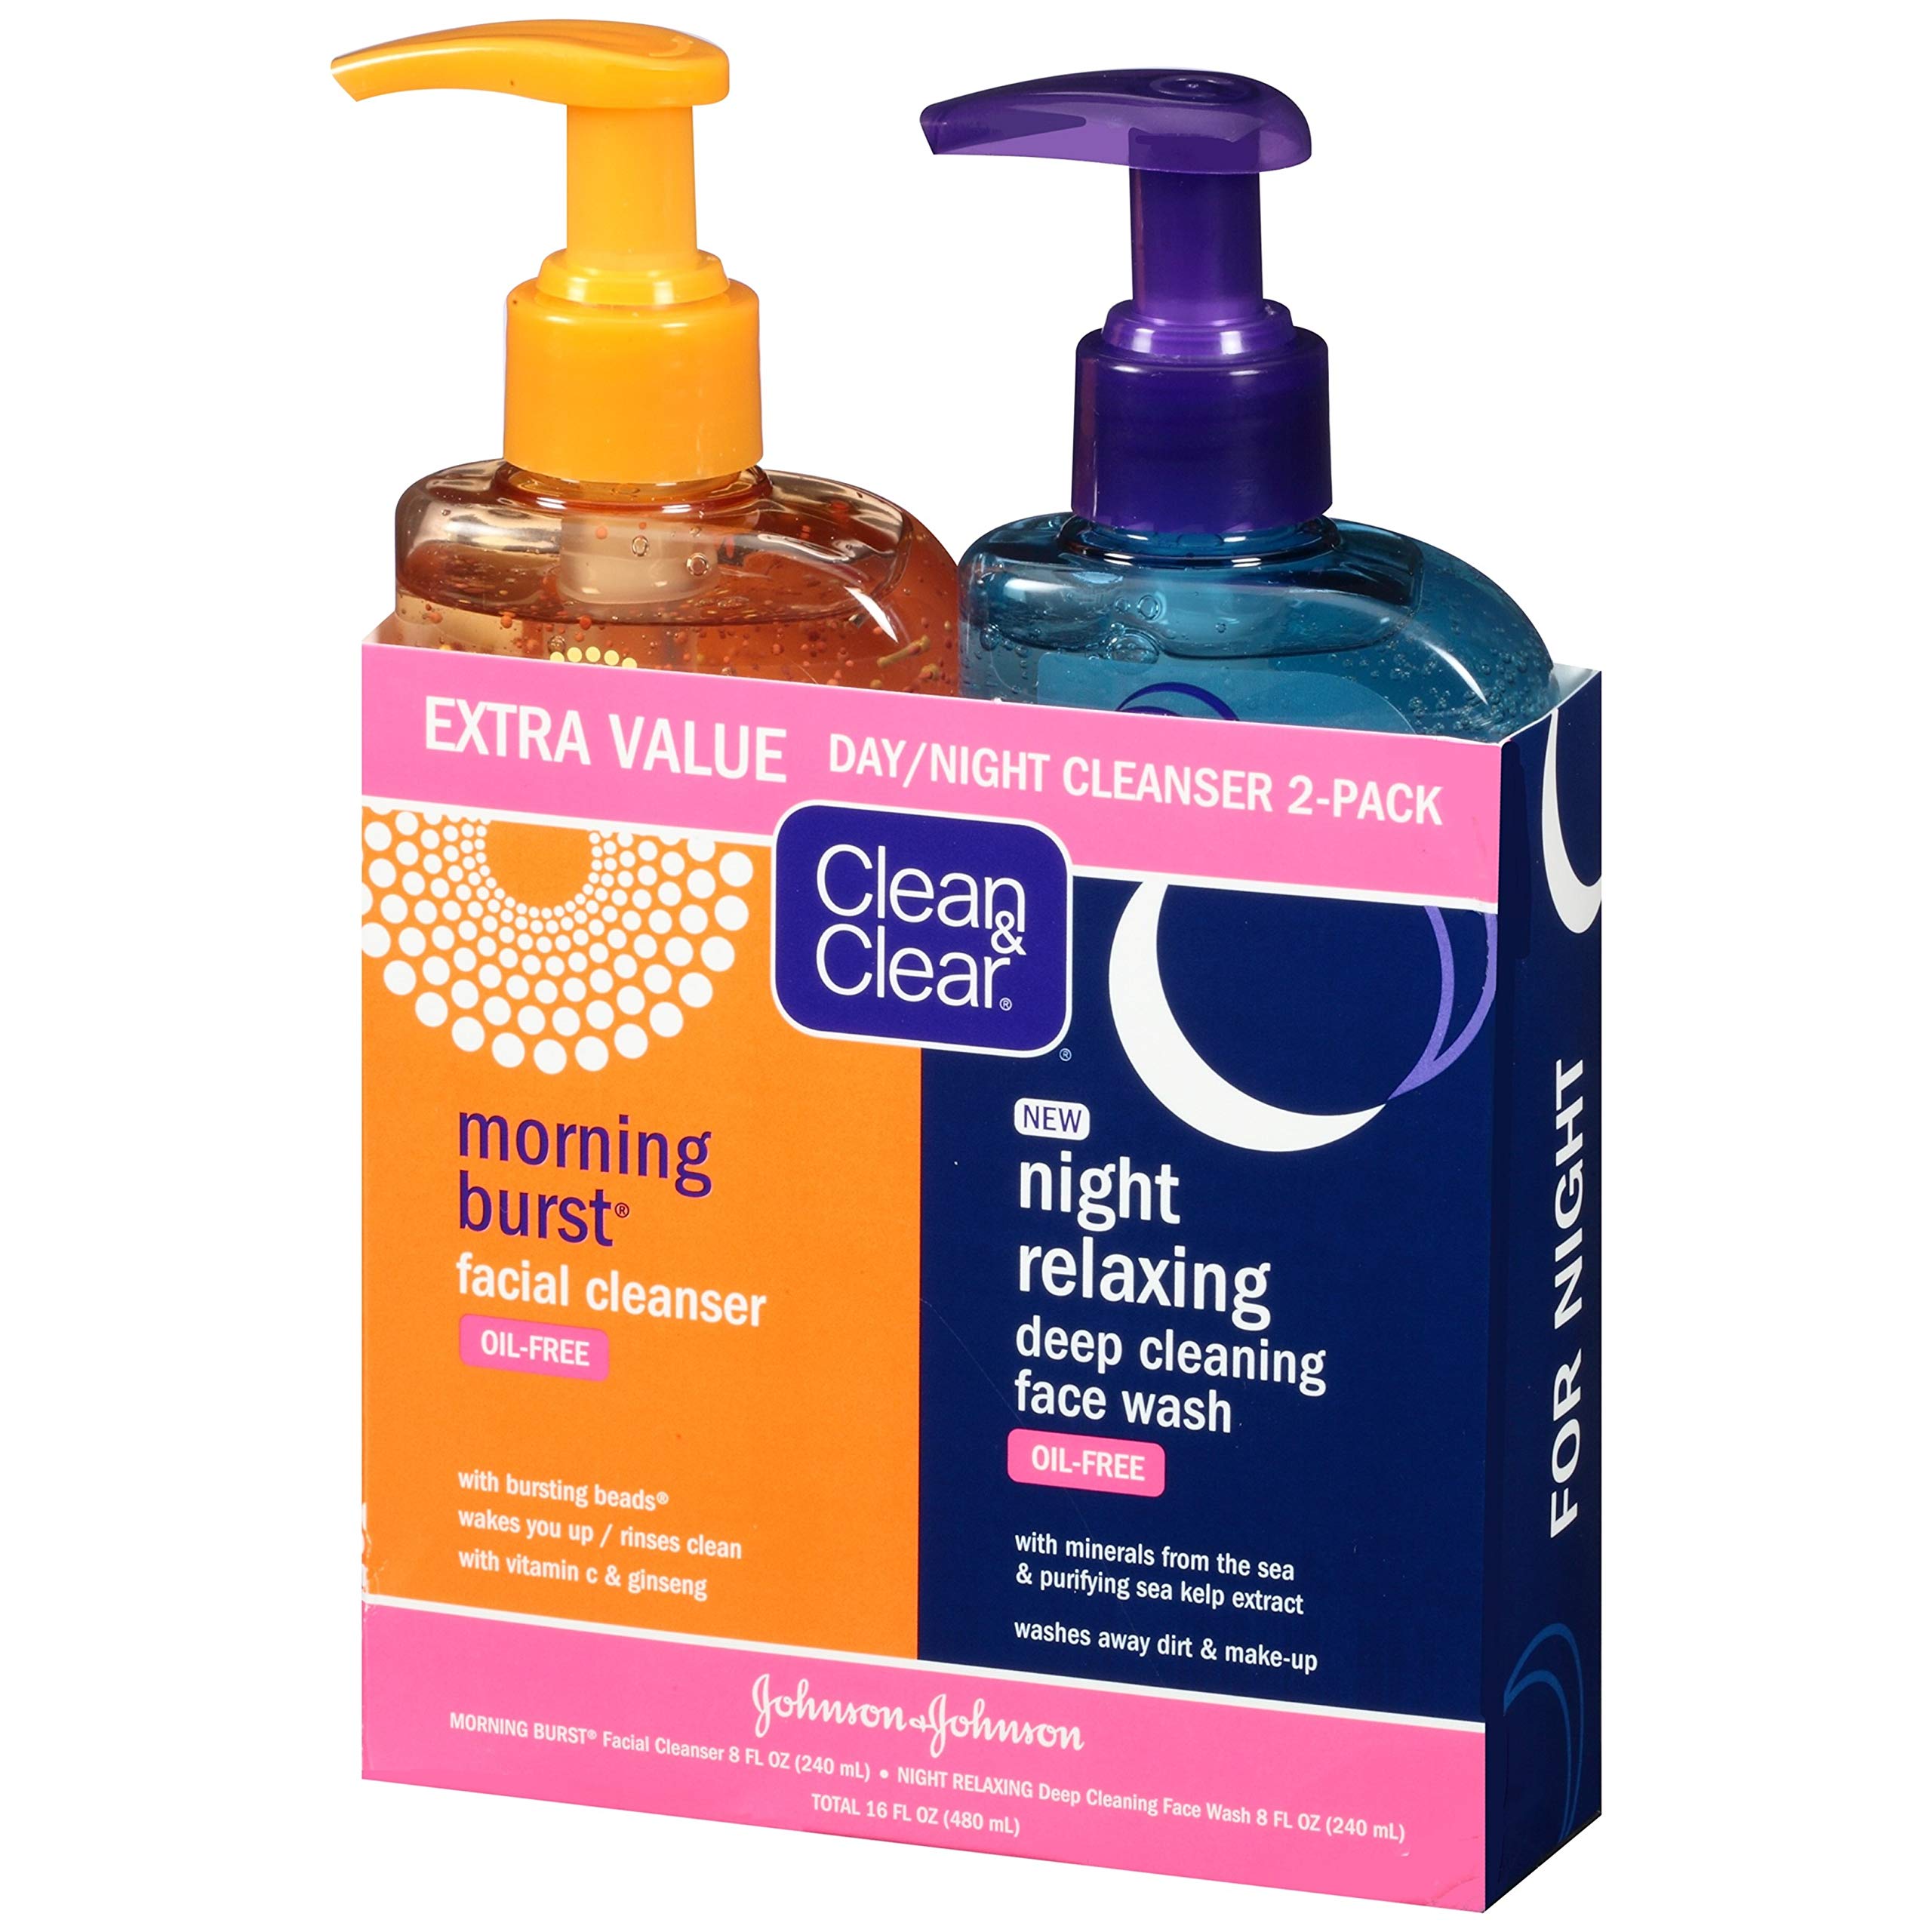 Clean & Clear 2-Pack Citrus Morning Burst Facial Cleanser & Night Relaxing Face Wash - 16oz/12pk